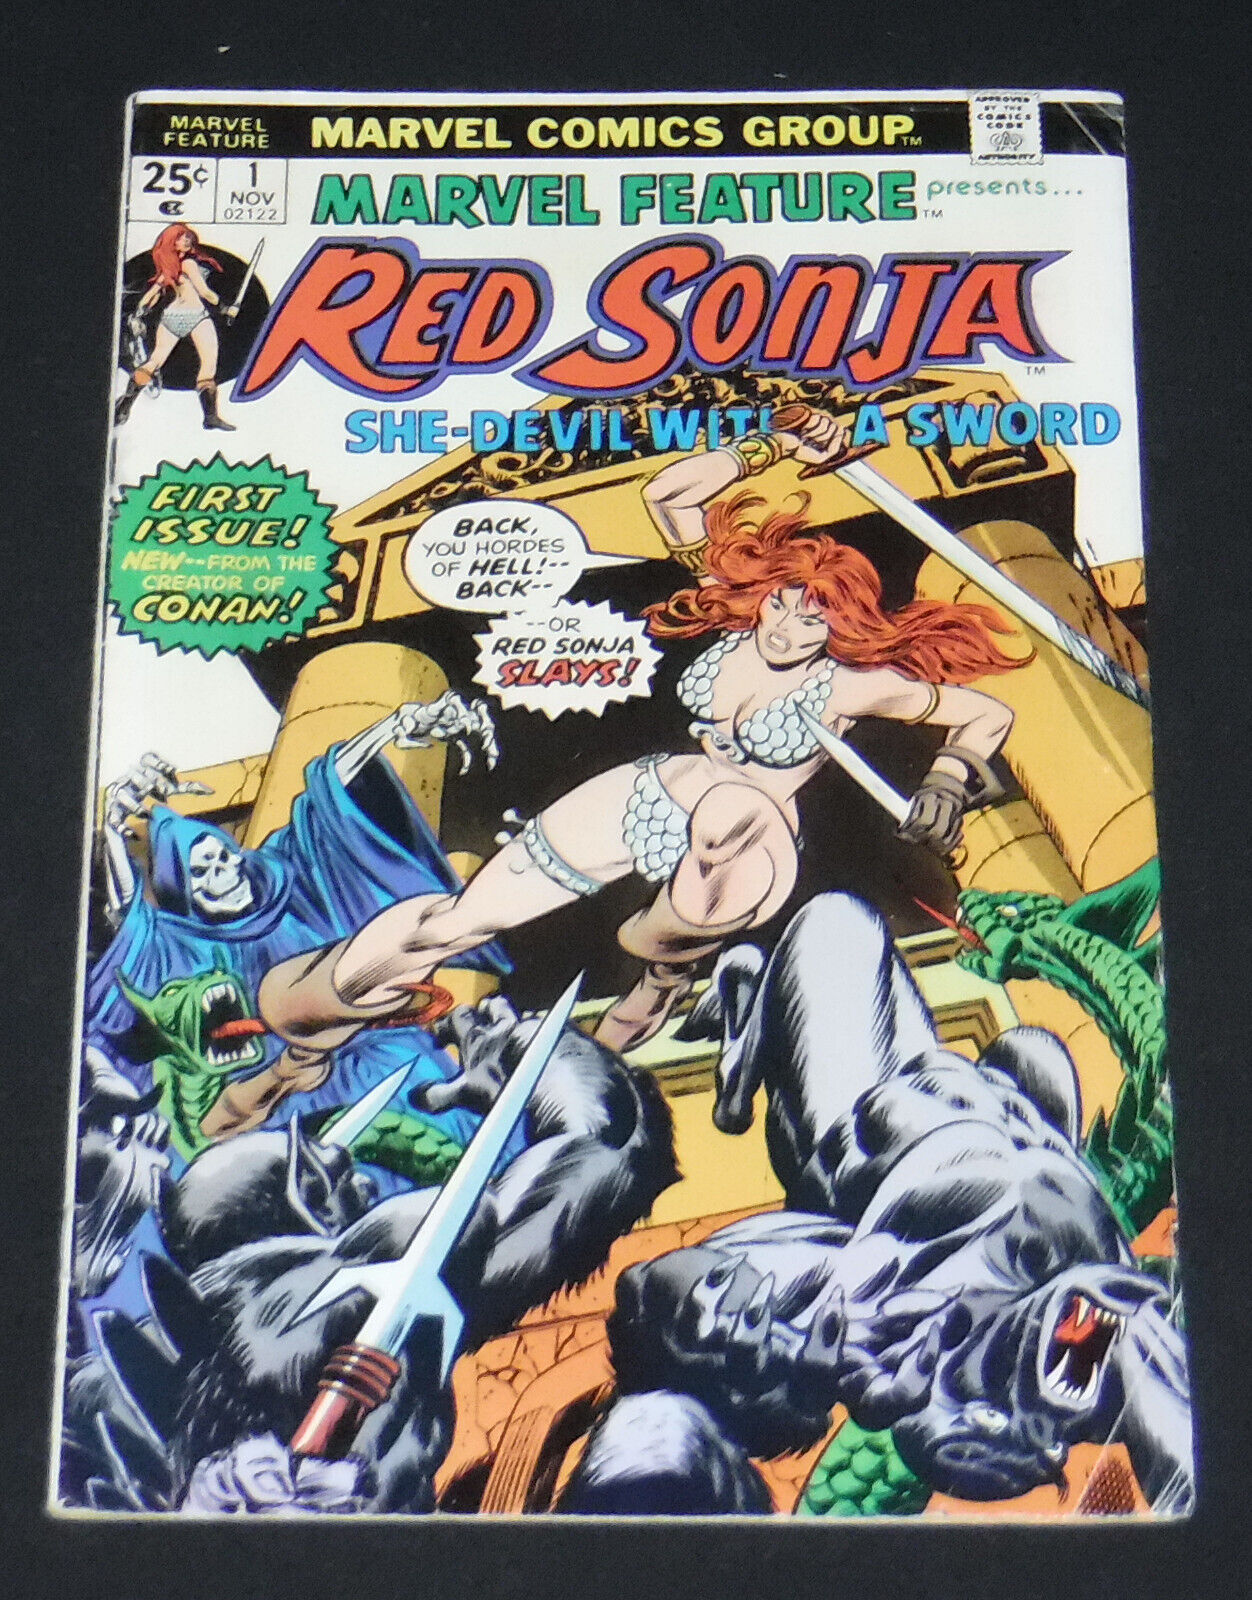 MARVEL FEATURE #1 RED SONJA 1975